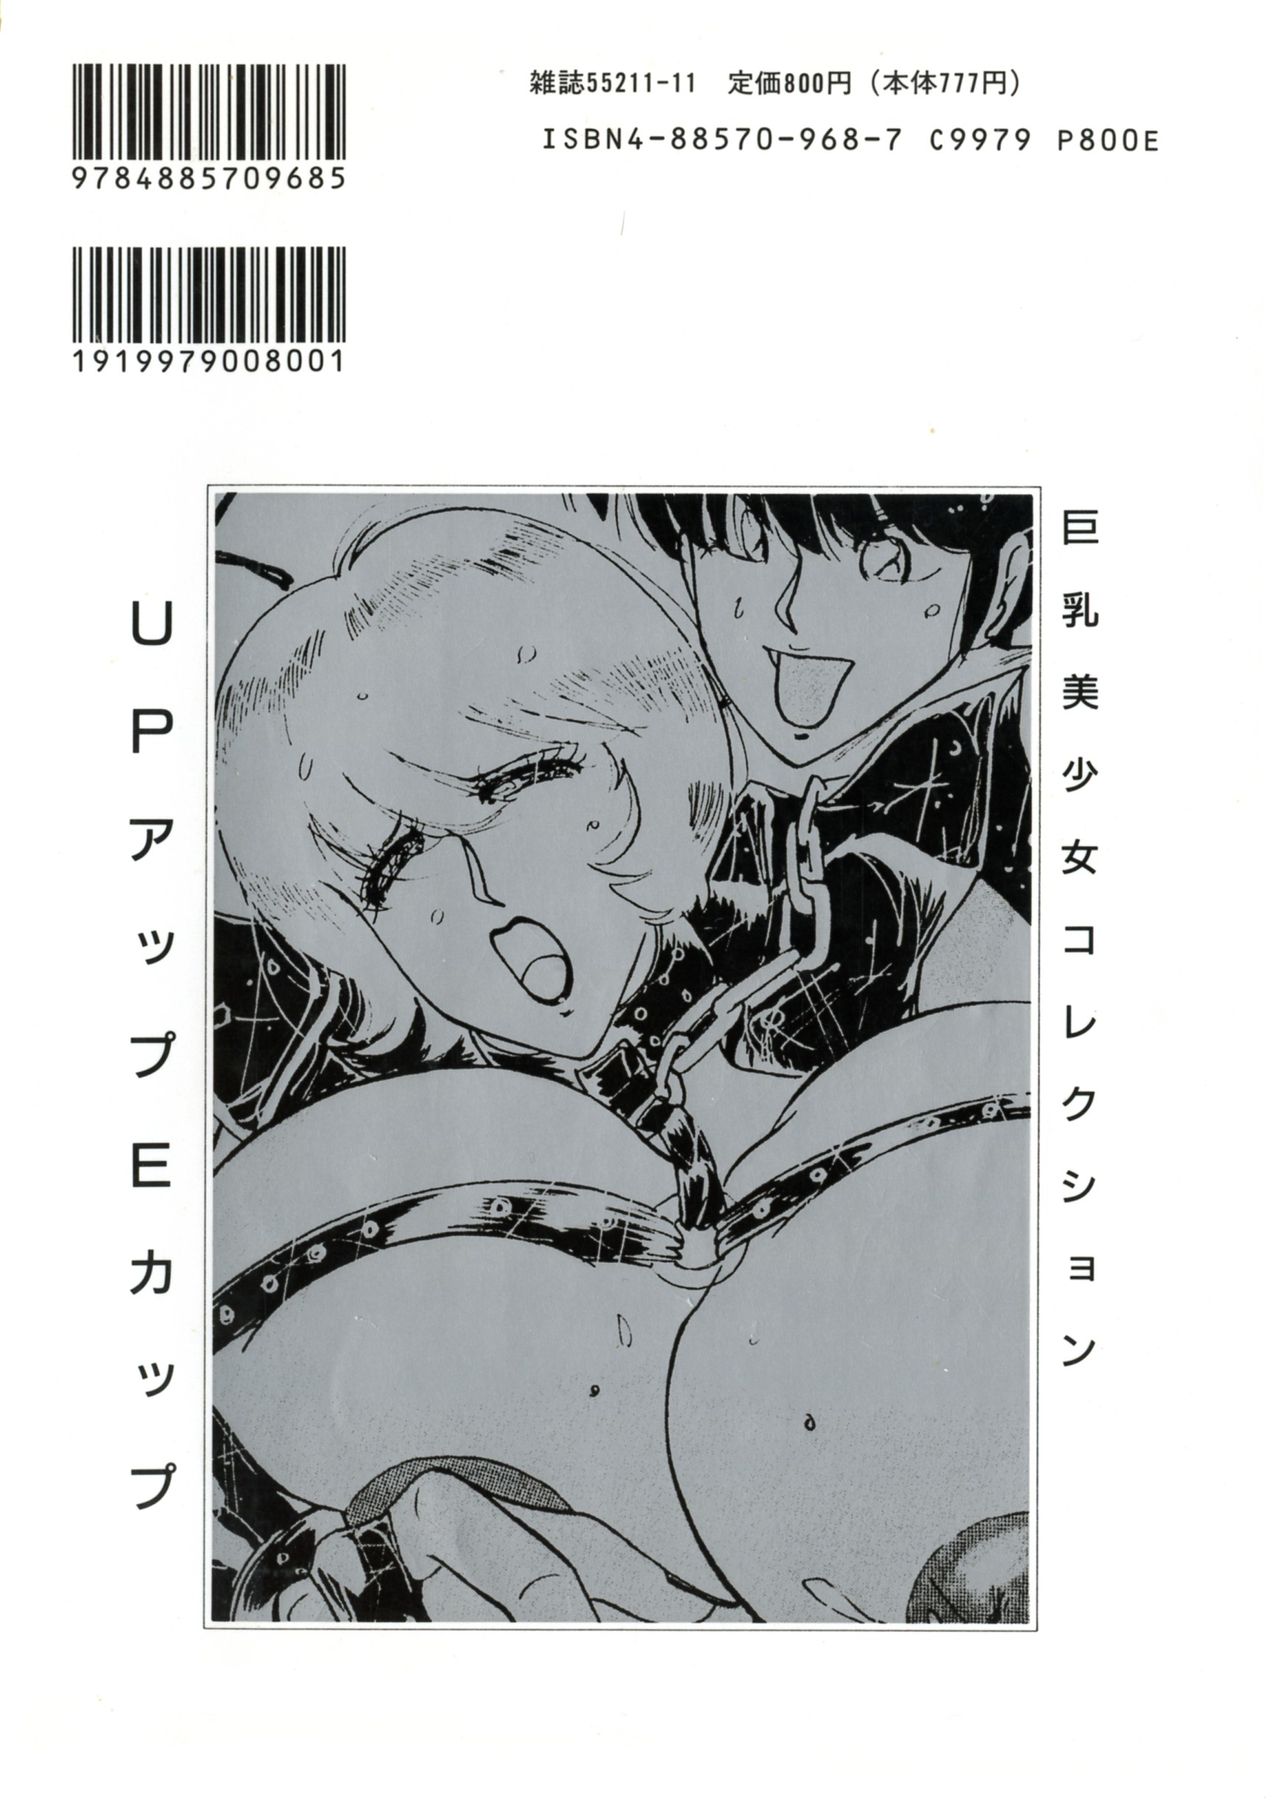 [Anthology] UP Up E-cup 4 page 2 full